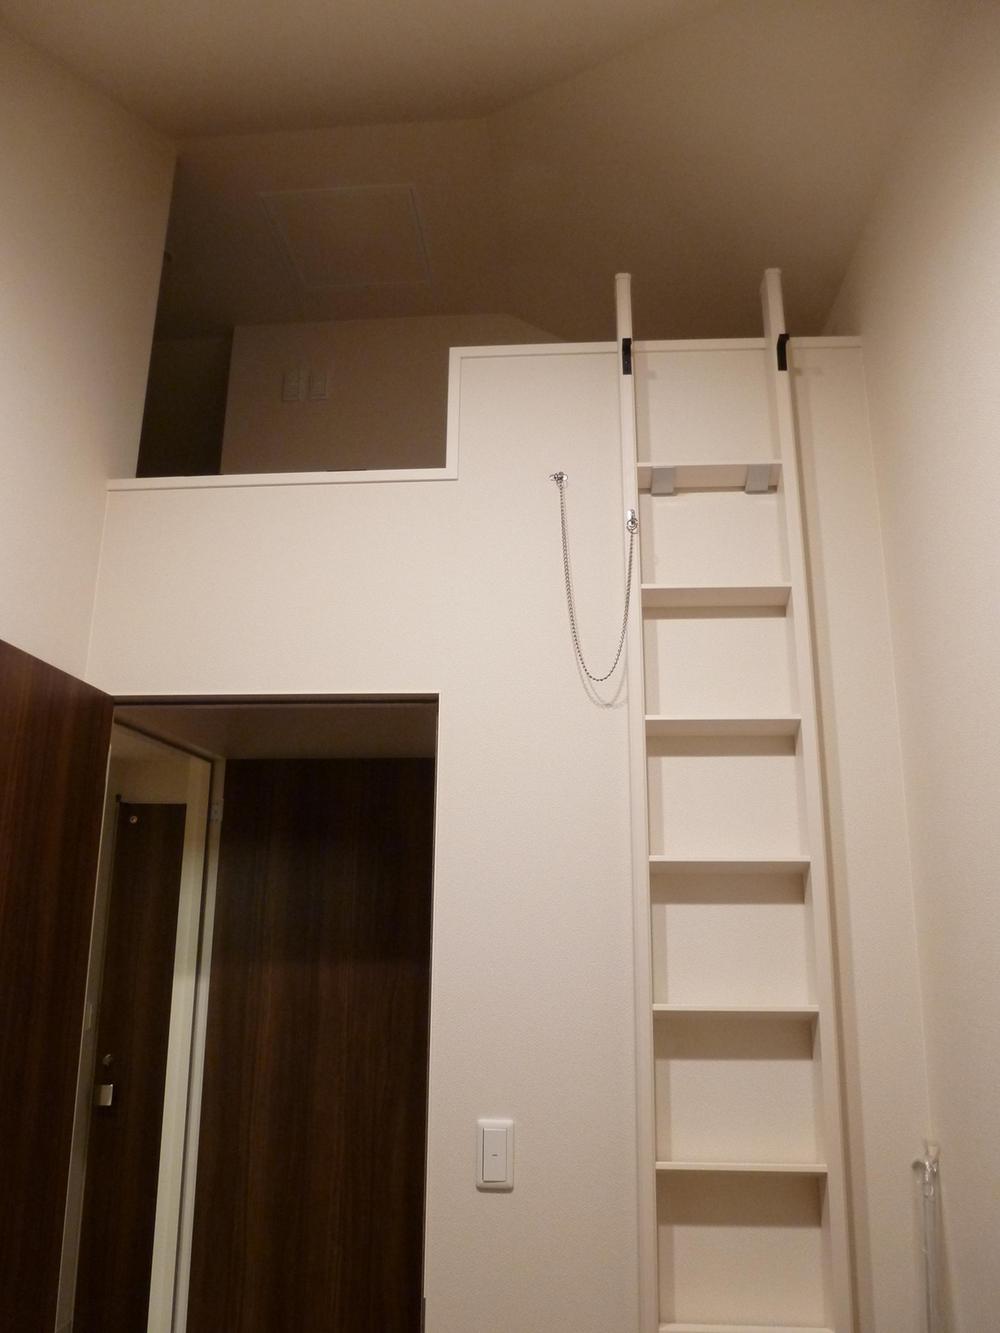 Other Equipment. Loft that offer easy-to-handle ladder durable (4 Building)